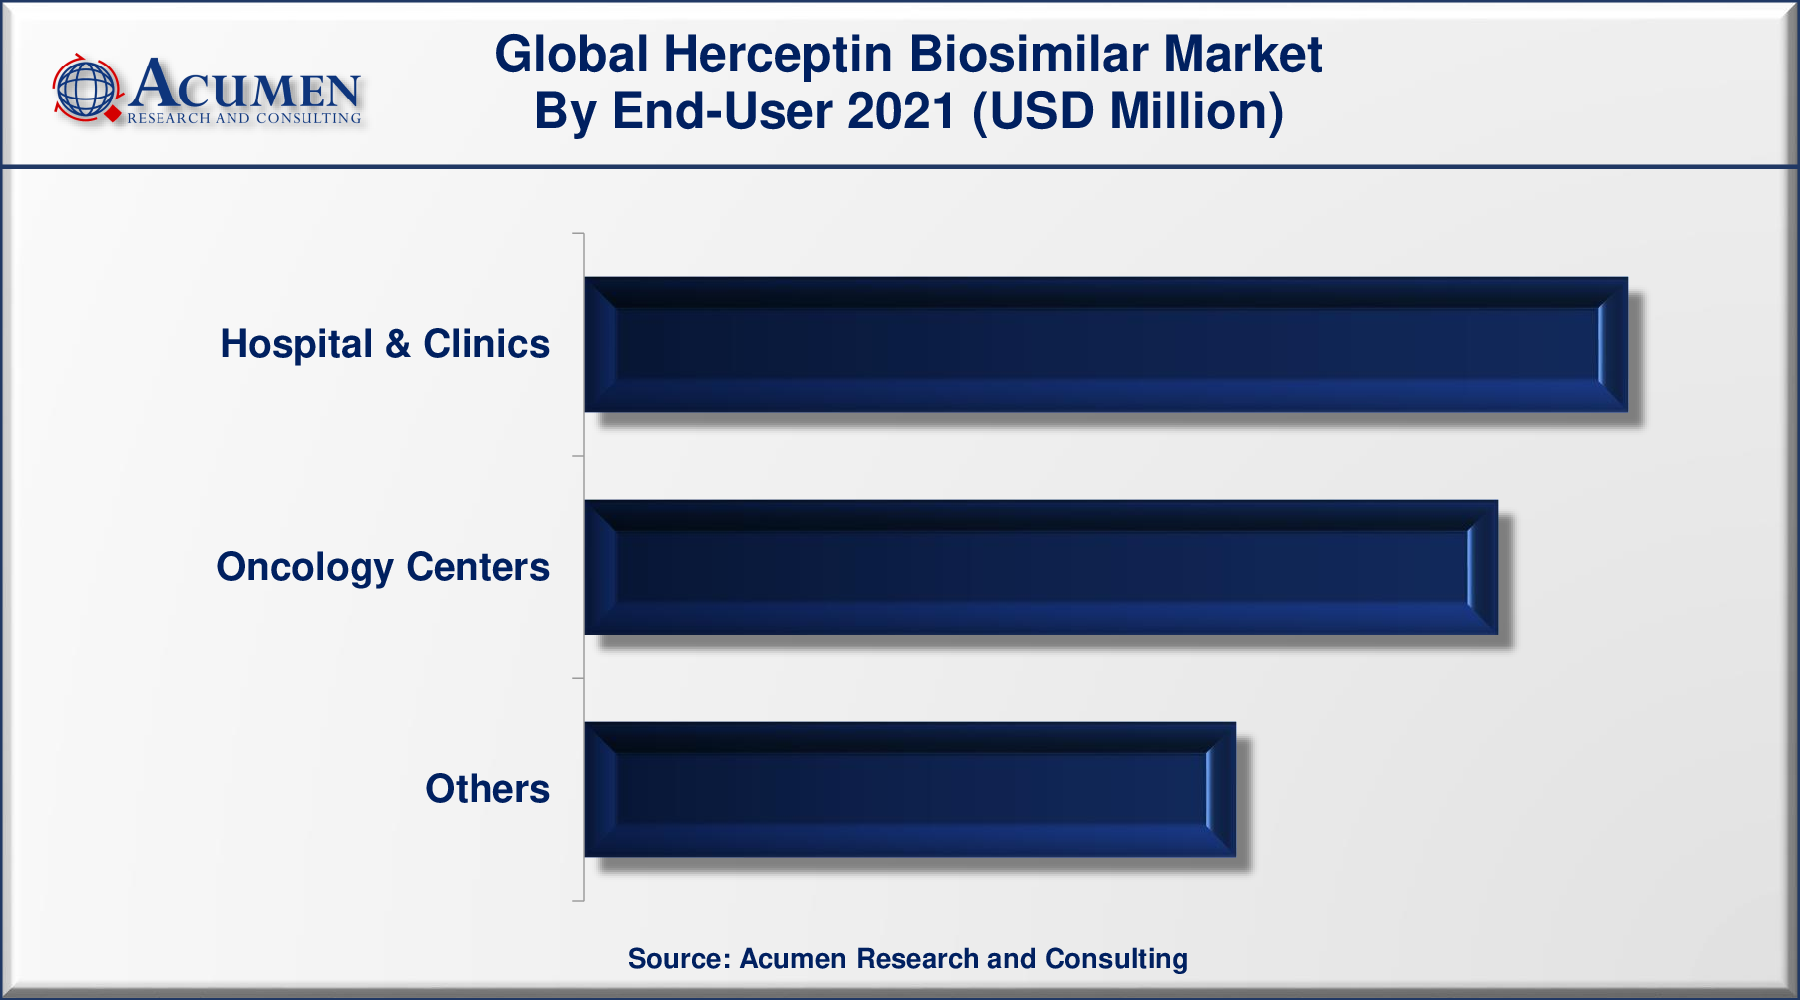 Herceptin Biosimilar Market Size was valued at USD 1,795 Million in 2021 and is predicted to be worth USD 11,287 Million by 2030